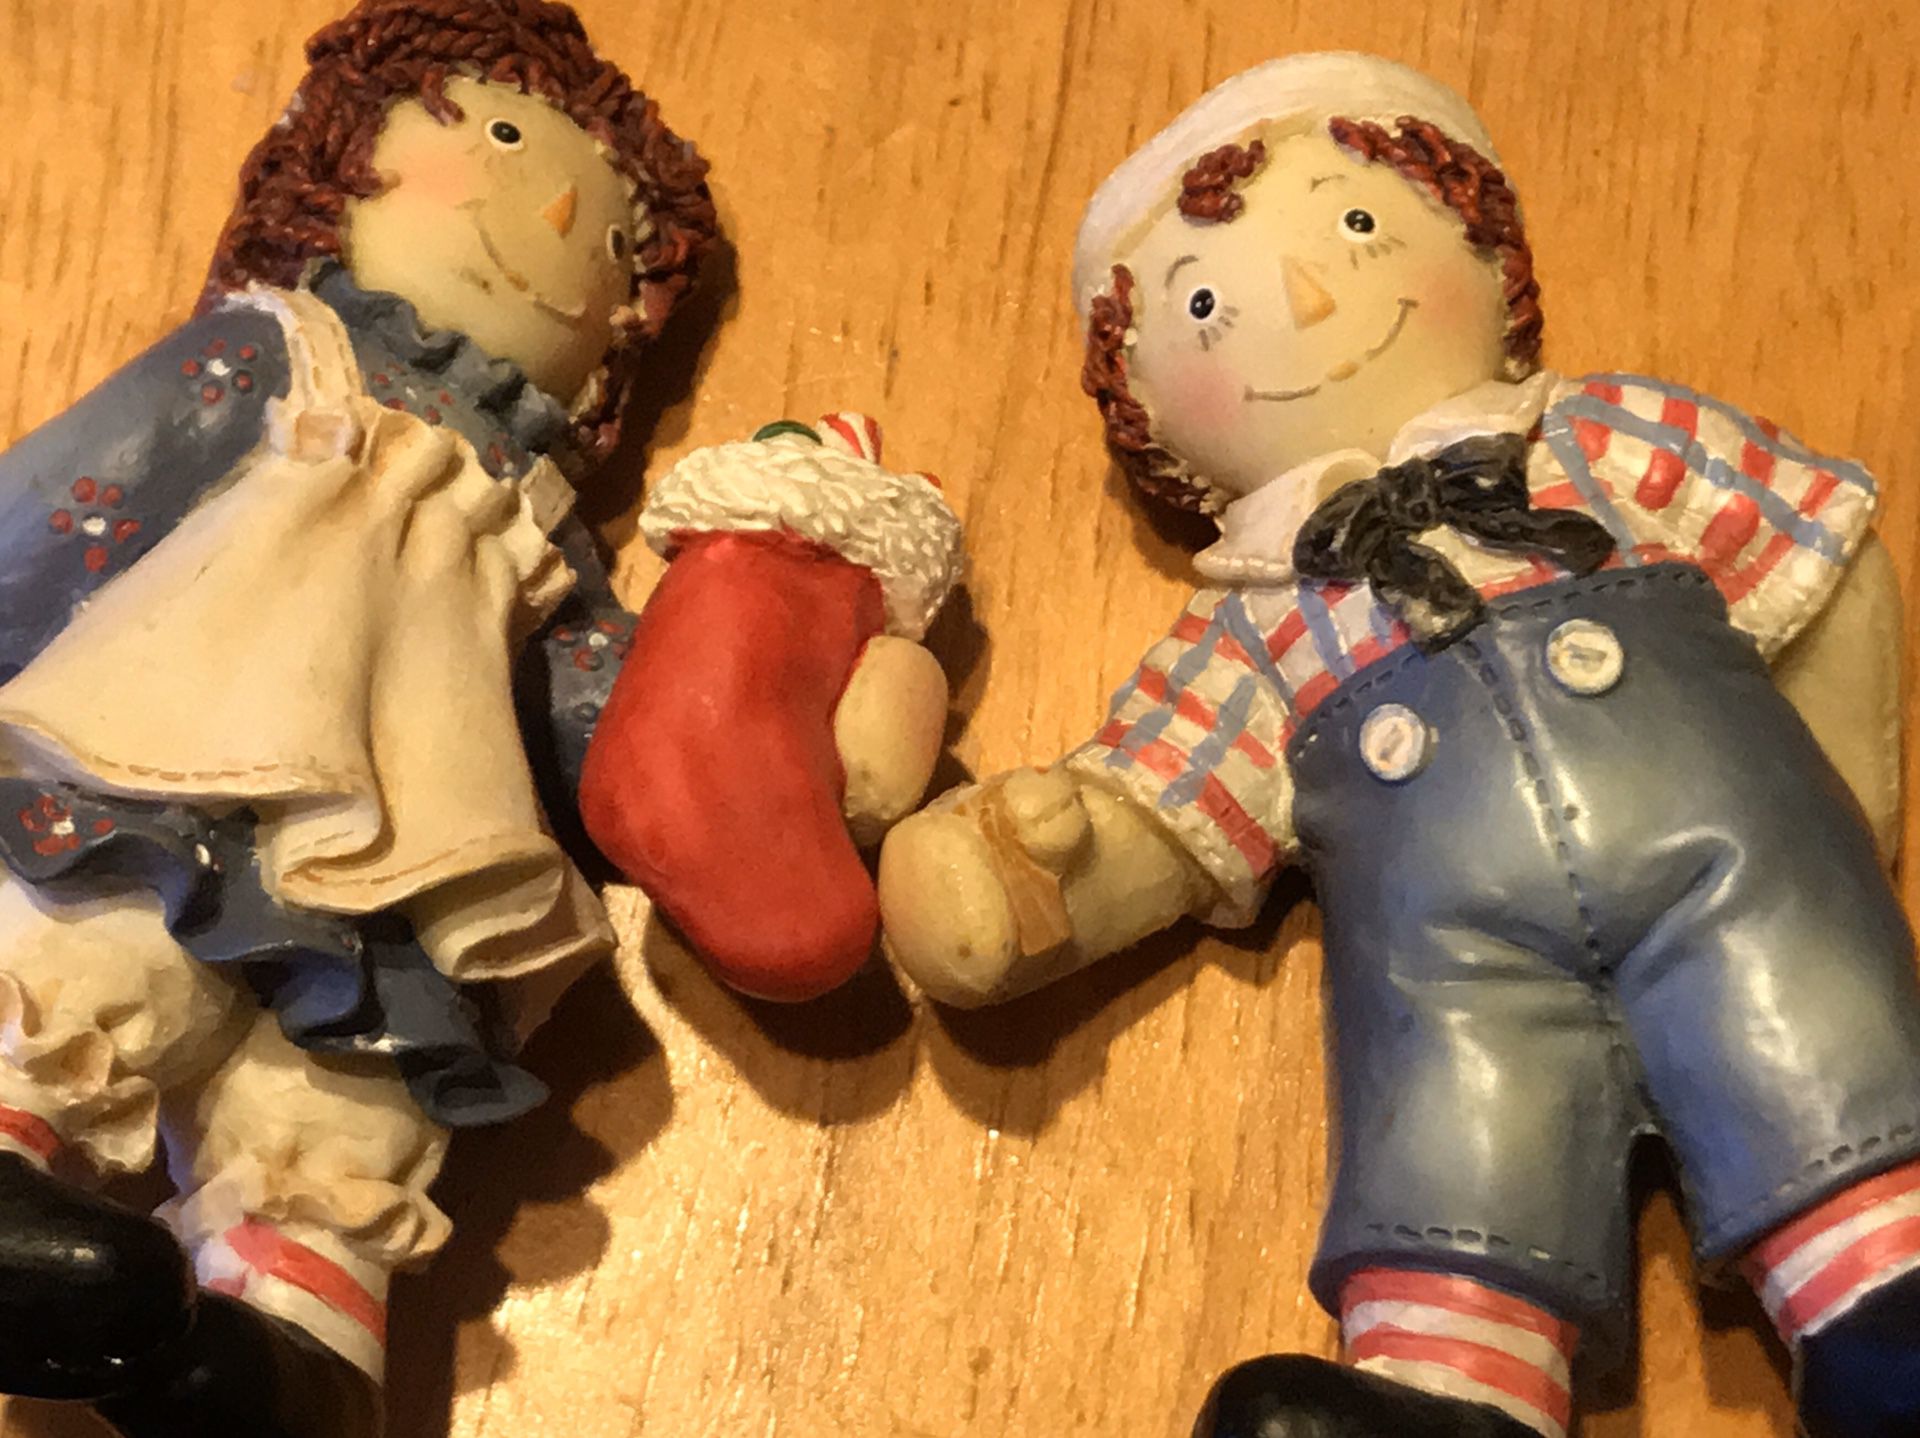 Raggedy Ann and Andy Christmas figurines